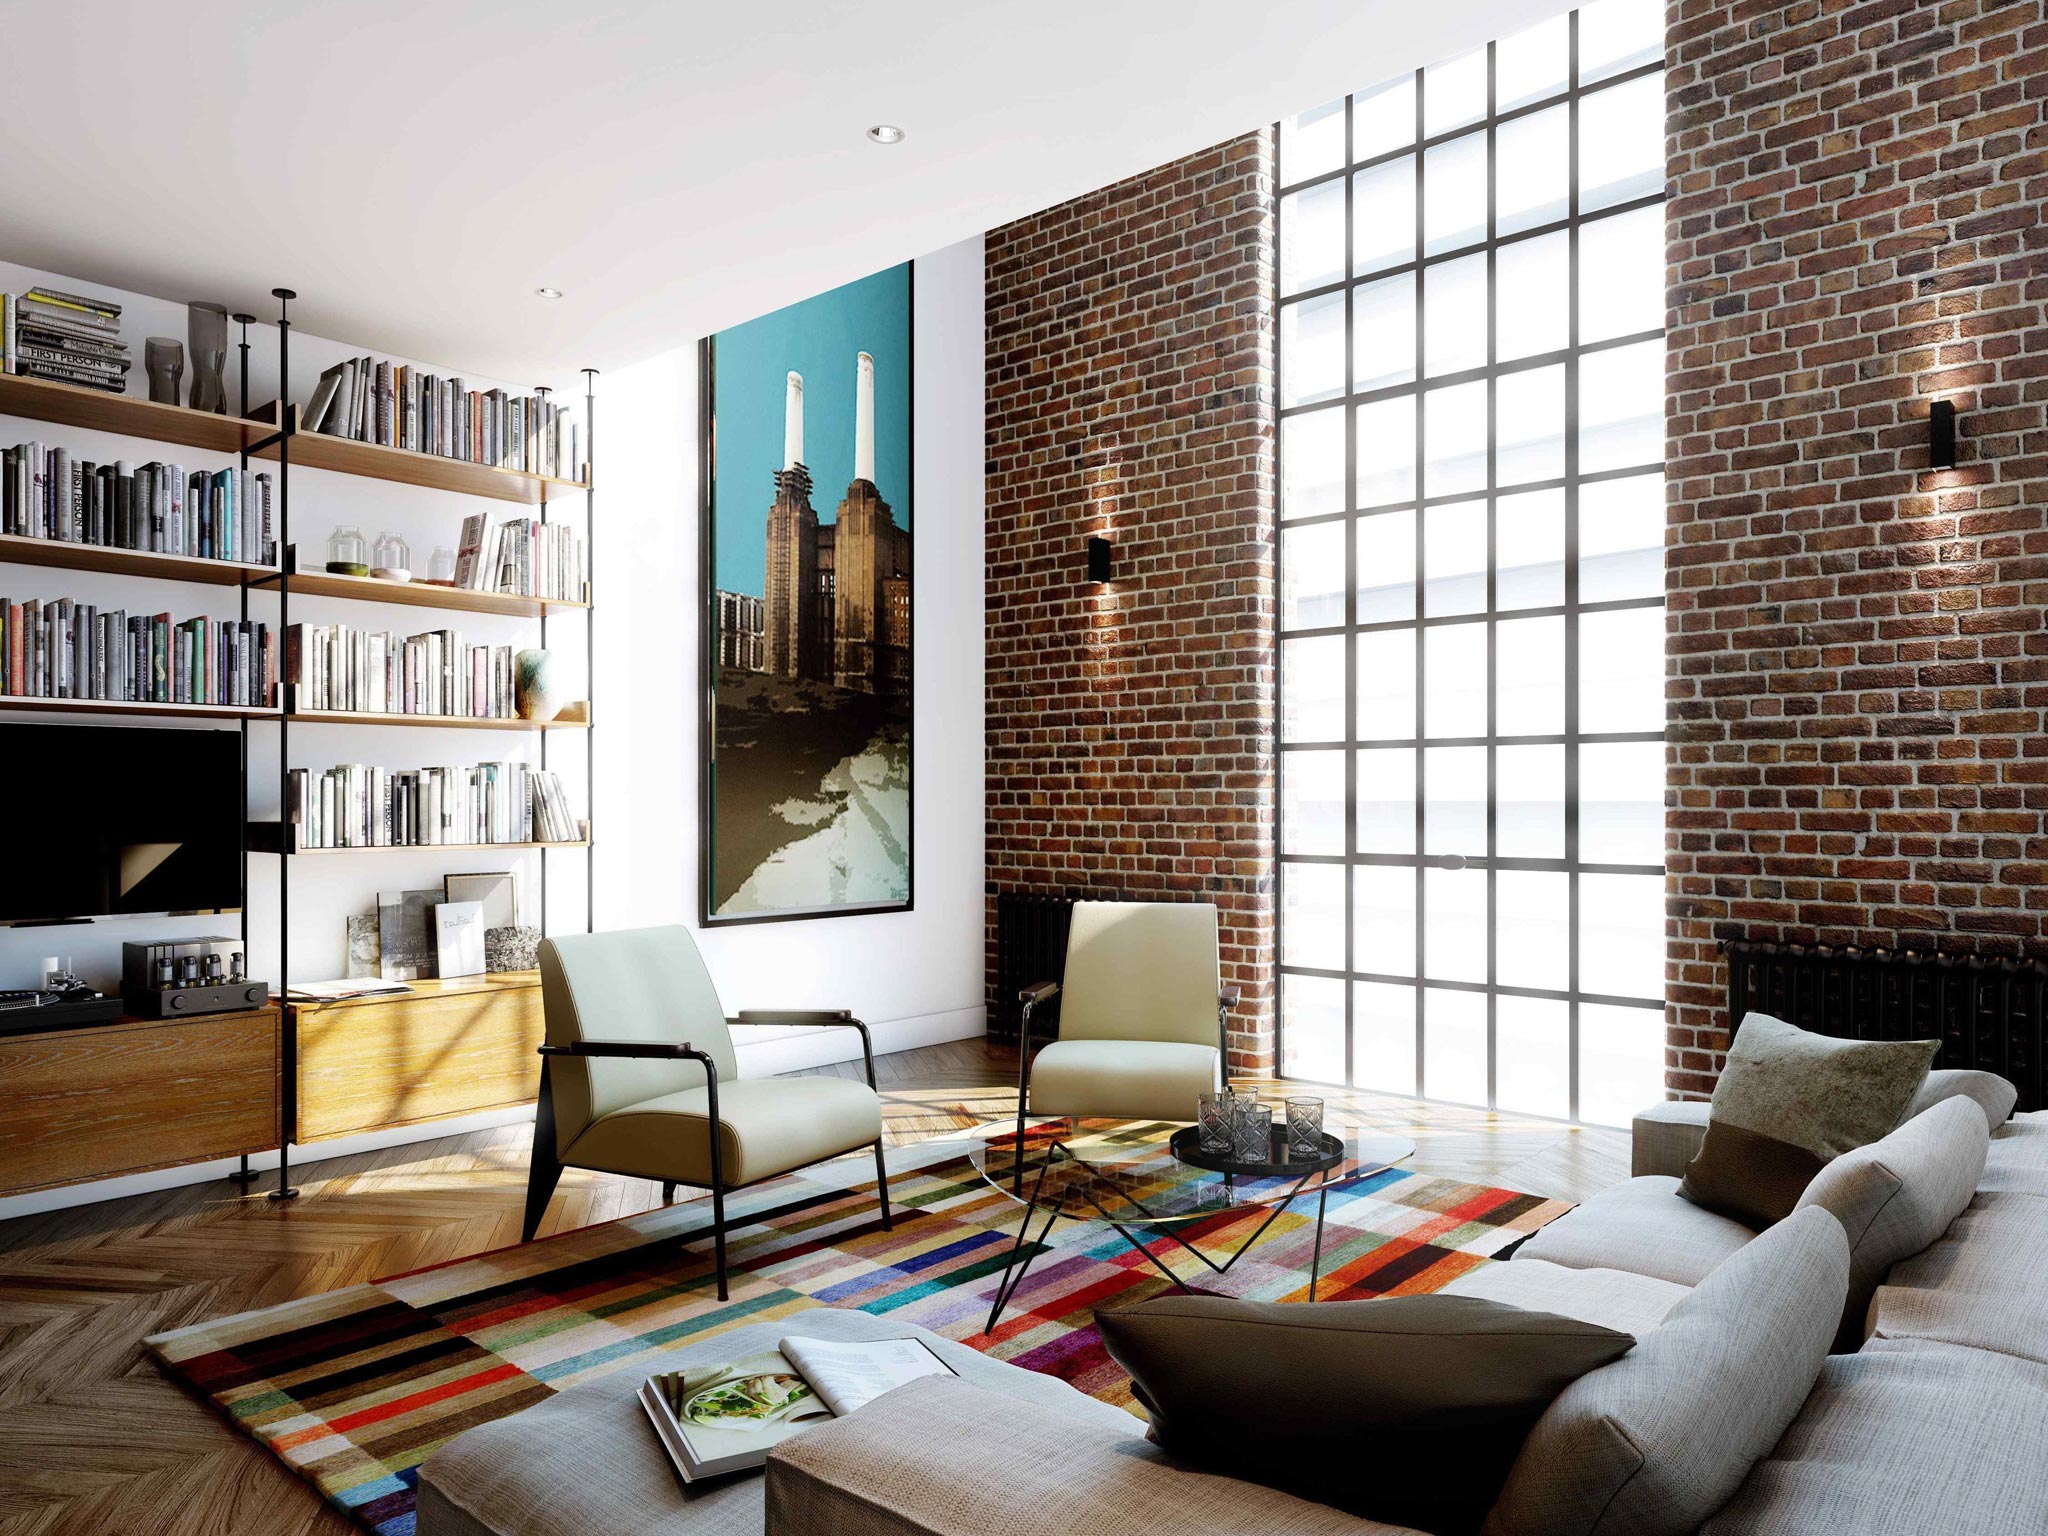 An artist's impression of an apartment living room at the Battersea Power Station